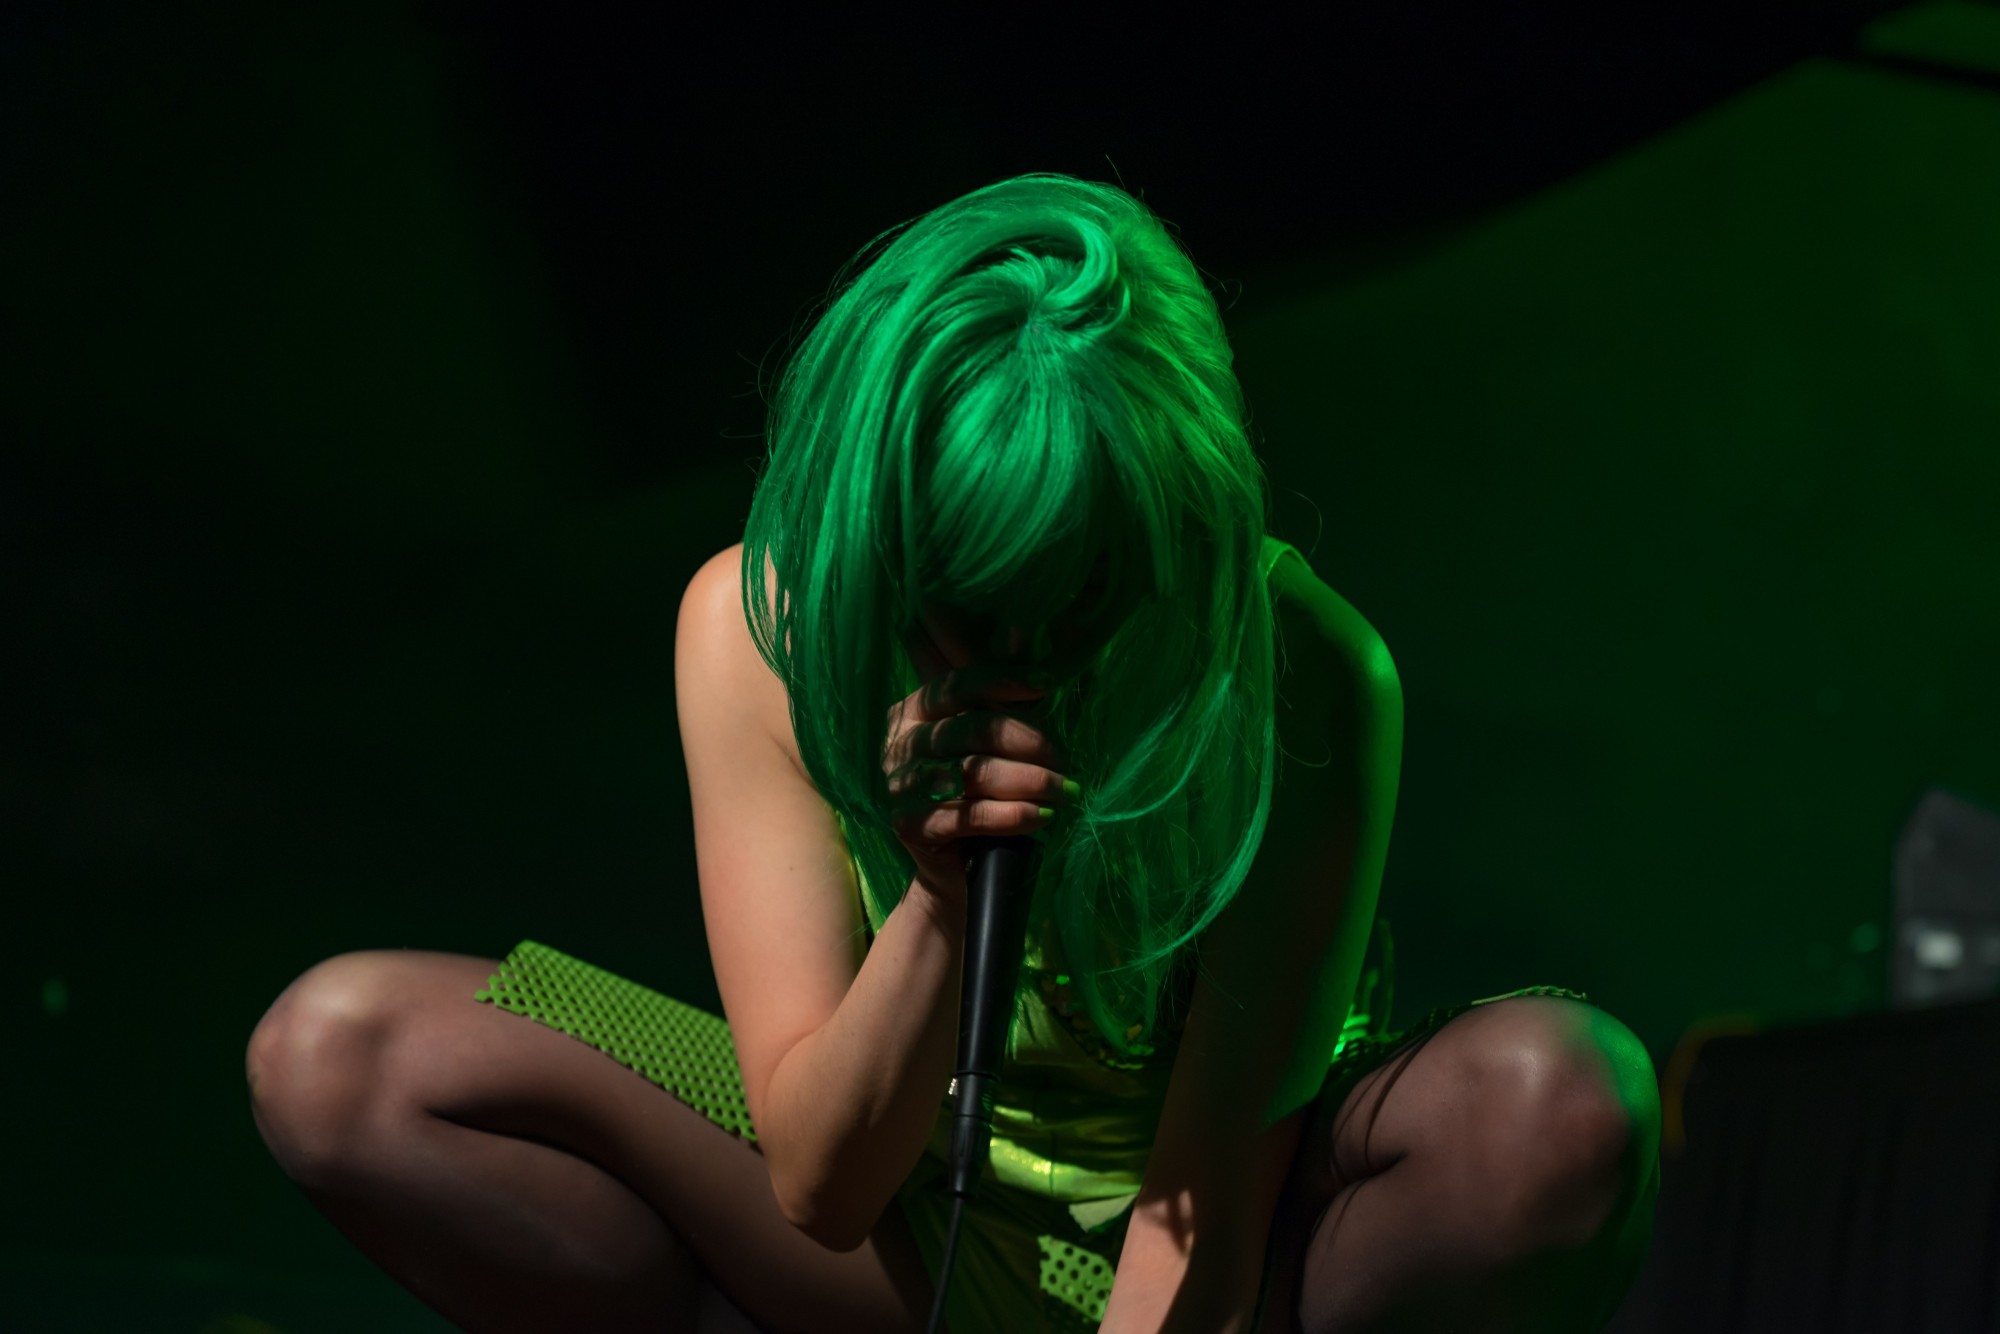 Leyya Mona Tawil [Lime Rickey International] is seated and crouched onstage, centered in a dark photograph. She is hunched over, holding a microphone. Her face is obscured by shadows and a lime green wig.